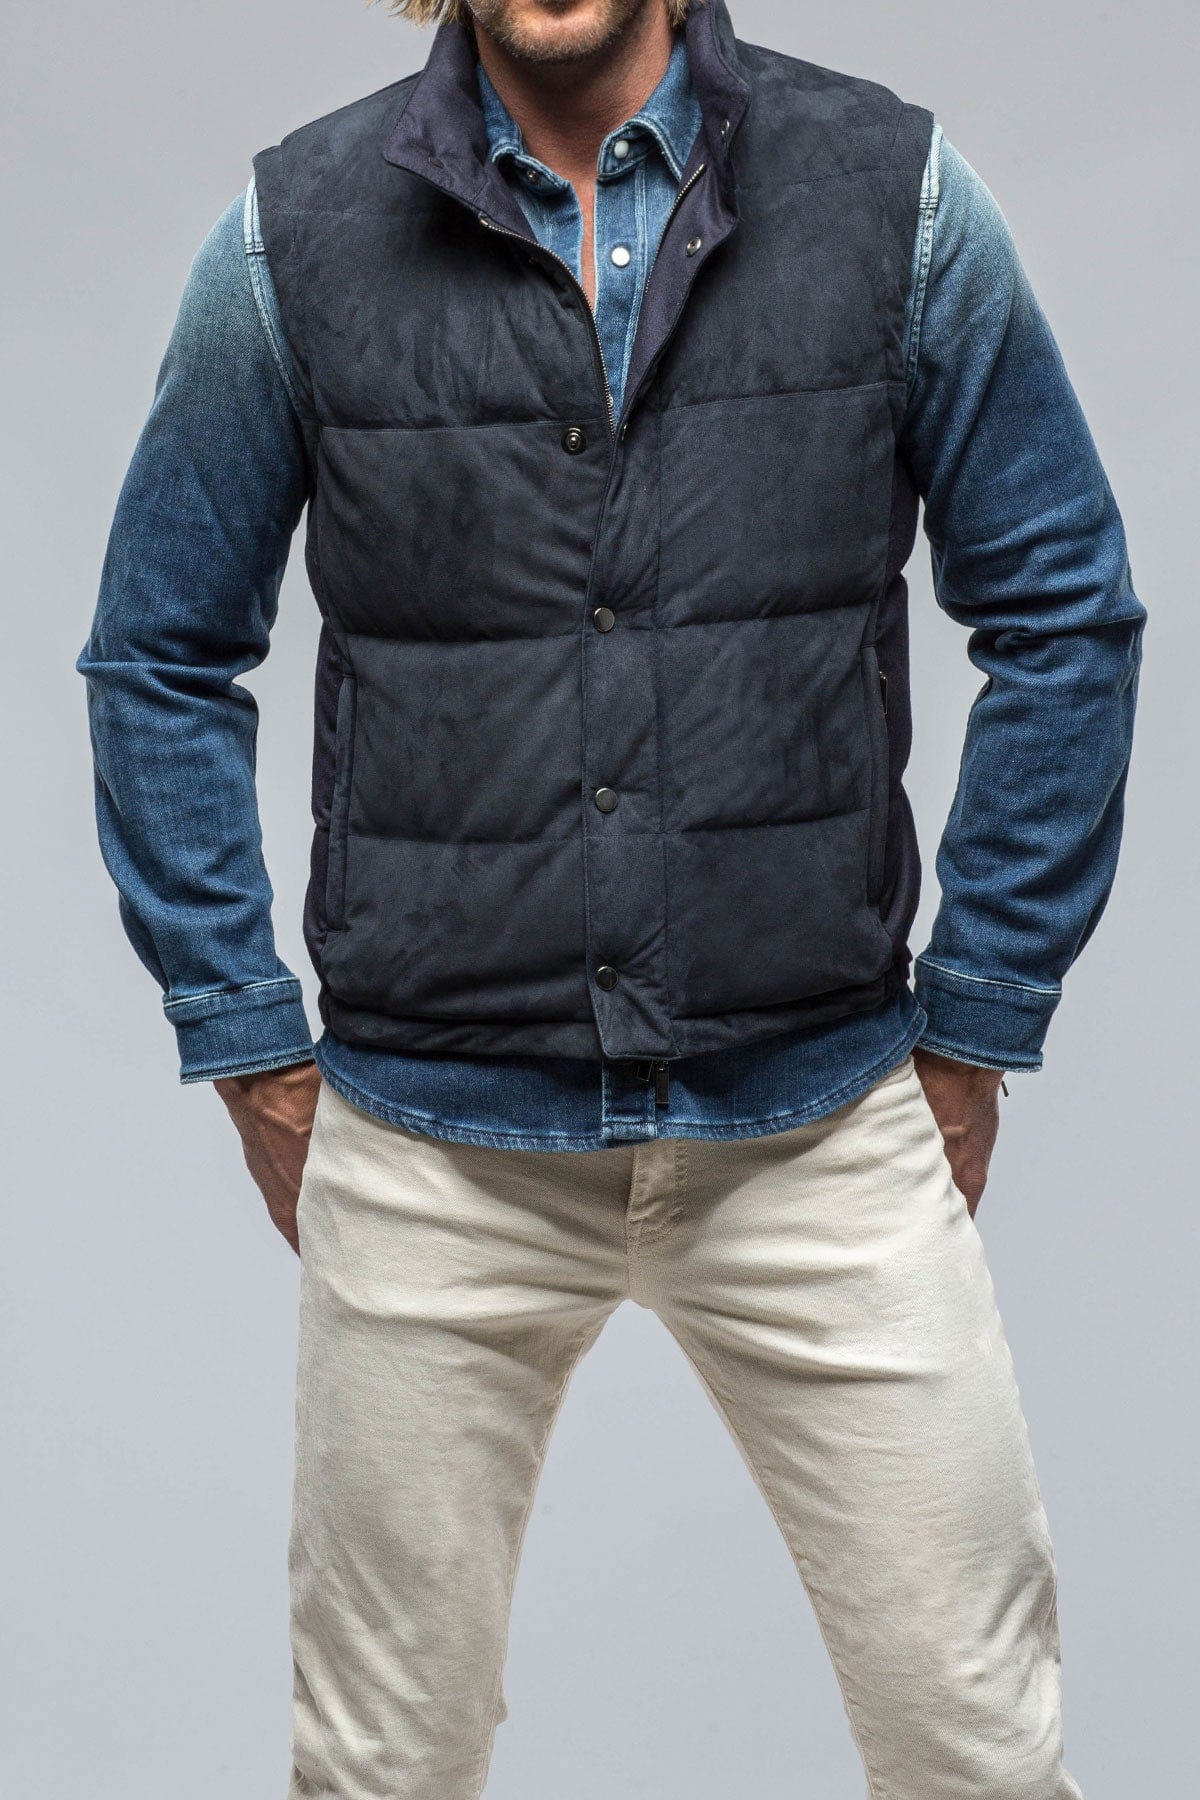 Gimo's Two Arrows Vest in Navy | Axel's of Vail